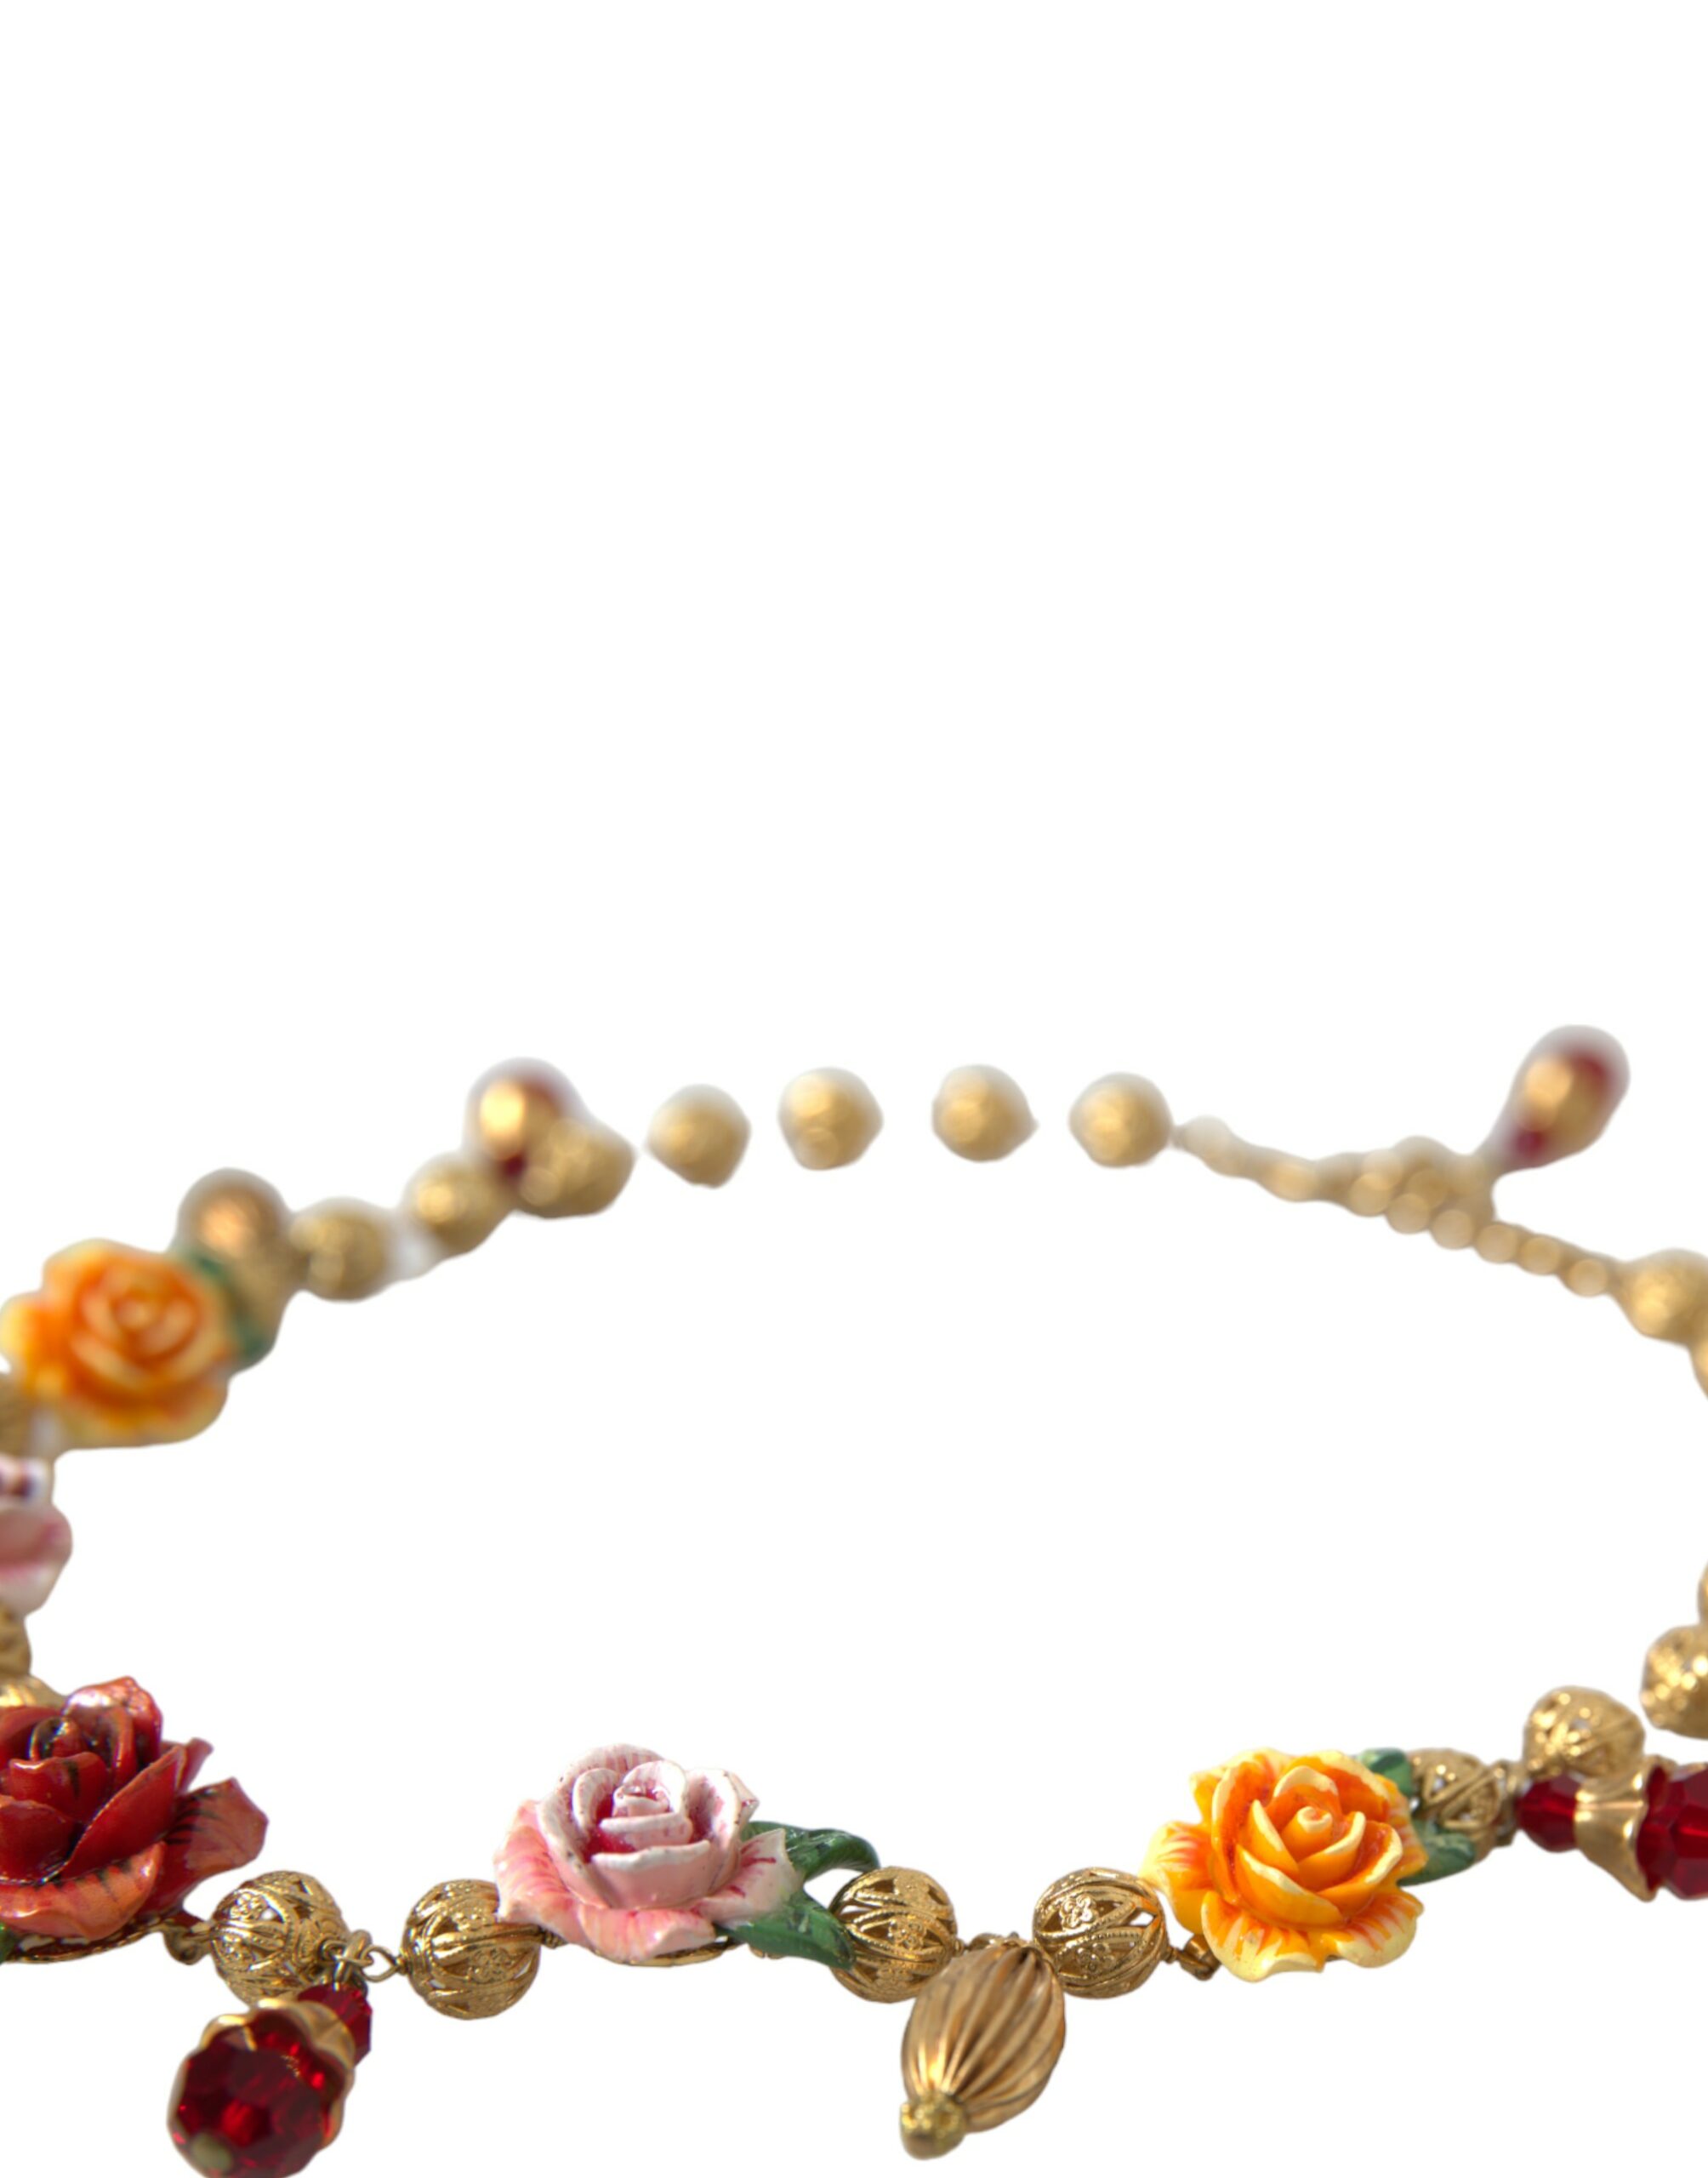 Crystal Floral Necklace with Gold Ball Chain